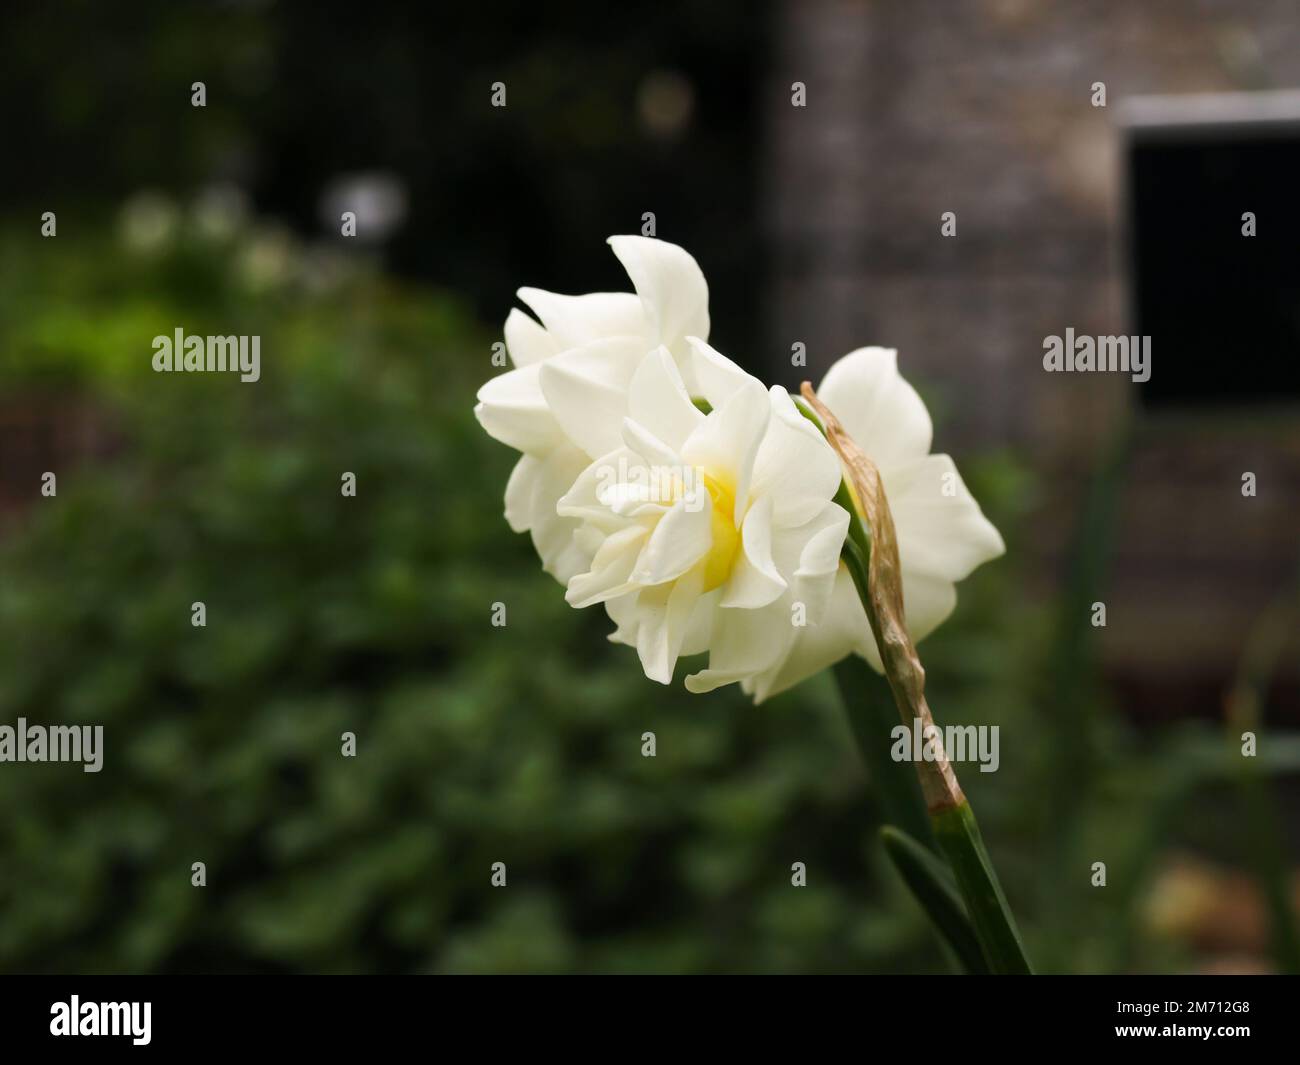 A closeup shot of a blooming white beautiful double hybrid daffodil flower Stock Photo